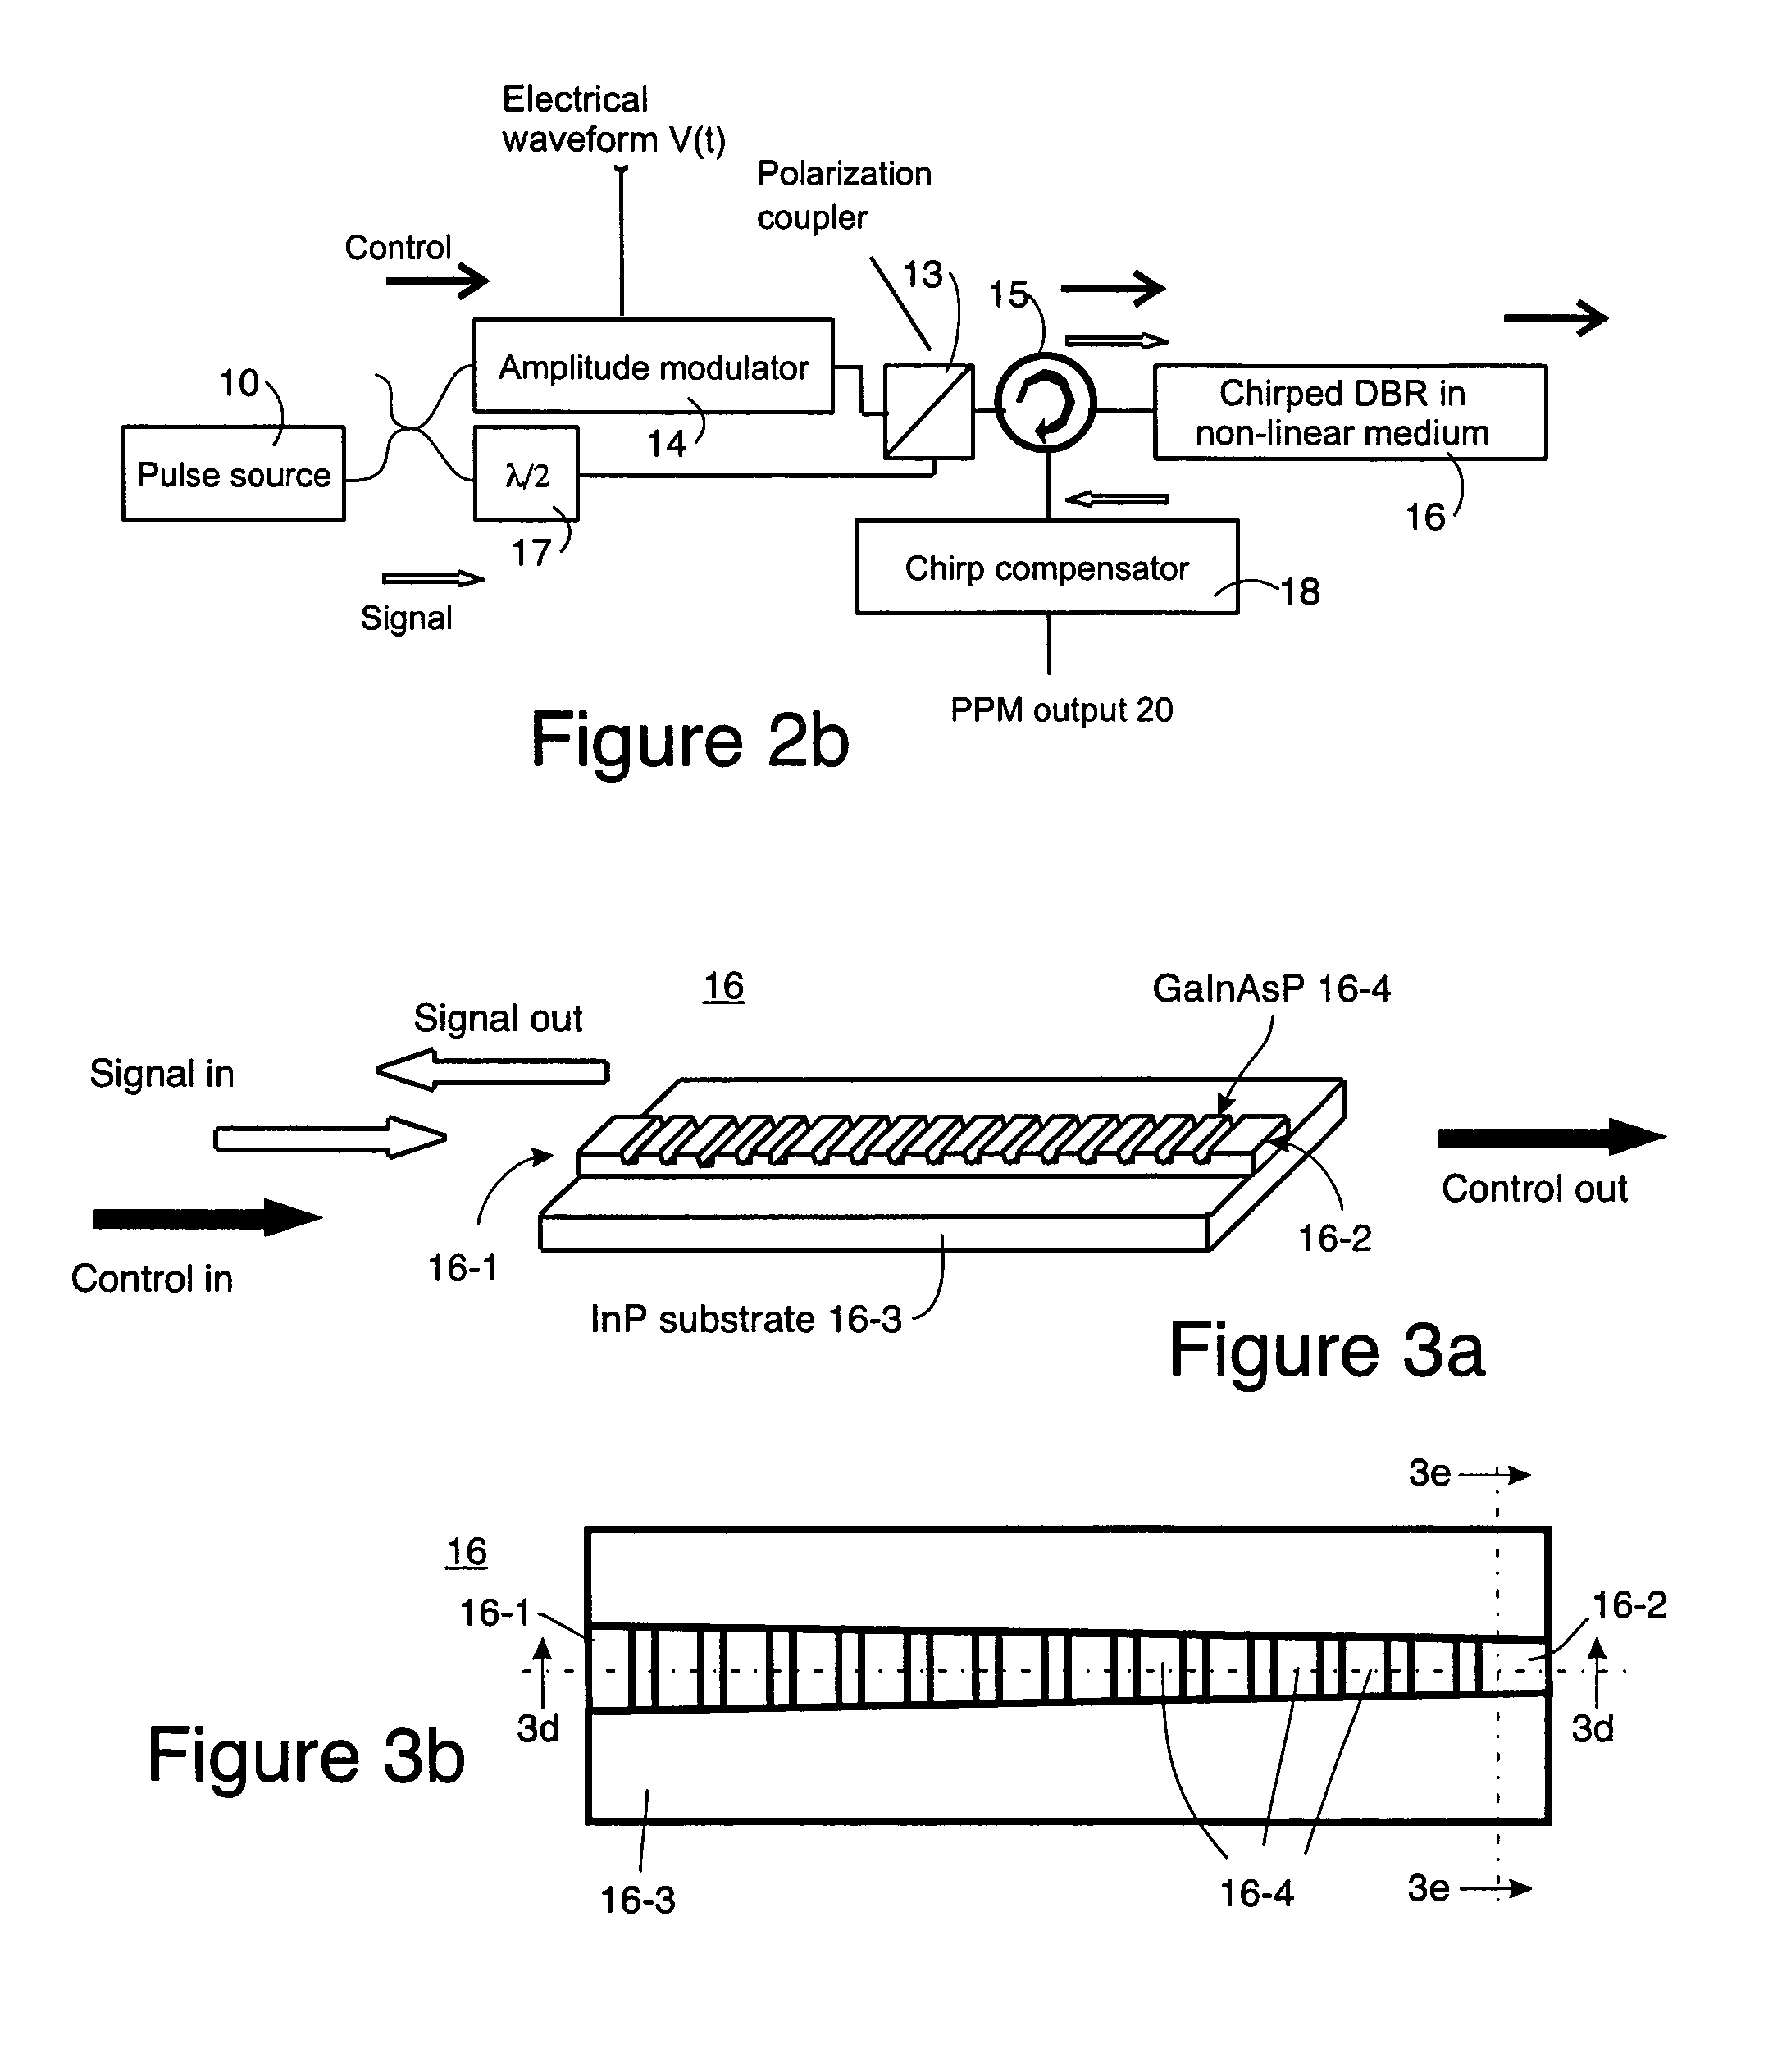 All-optical delay generator for PPM communication systems based on a non-linear waveguide with a chirped DBR